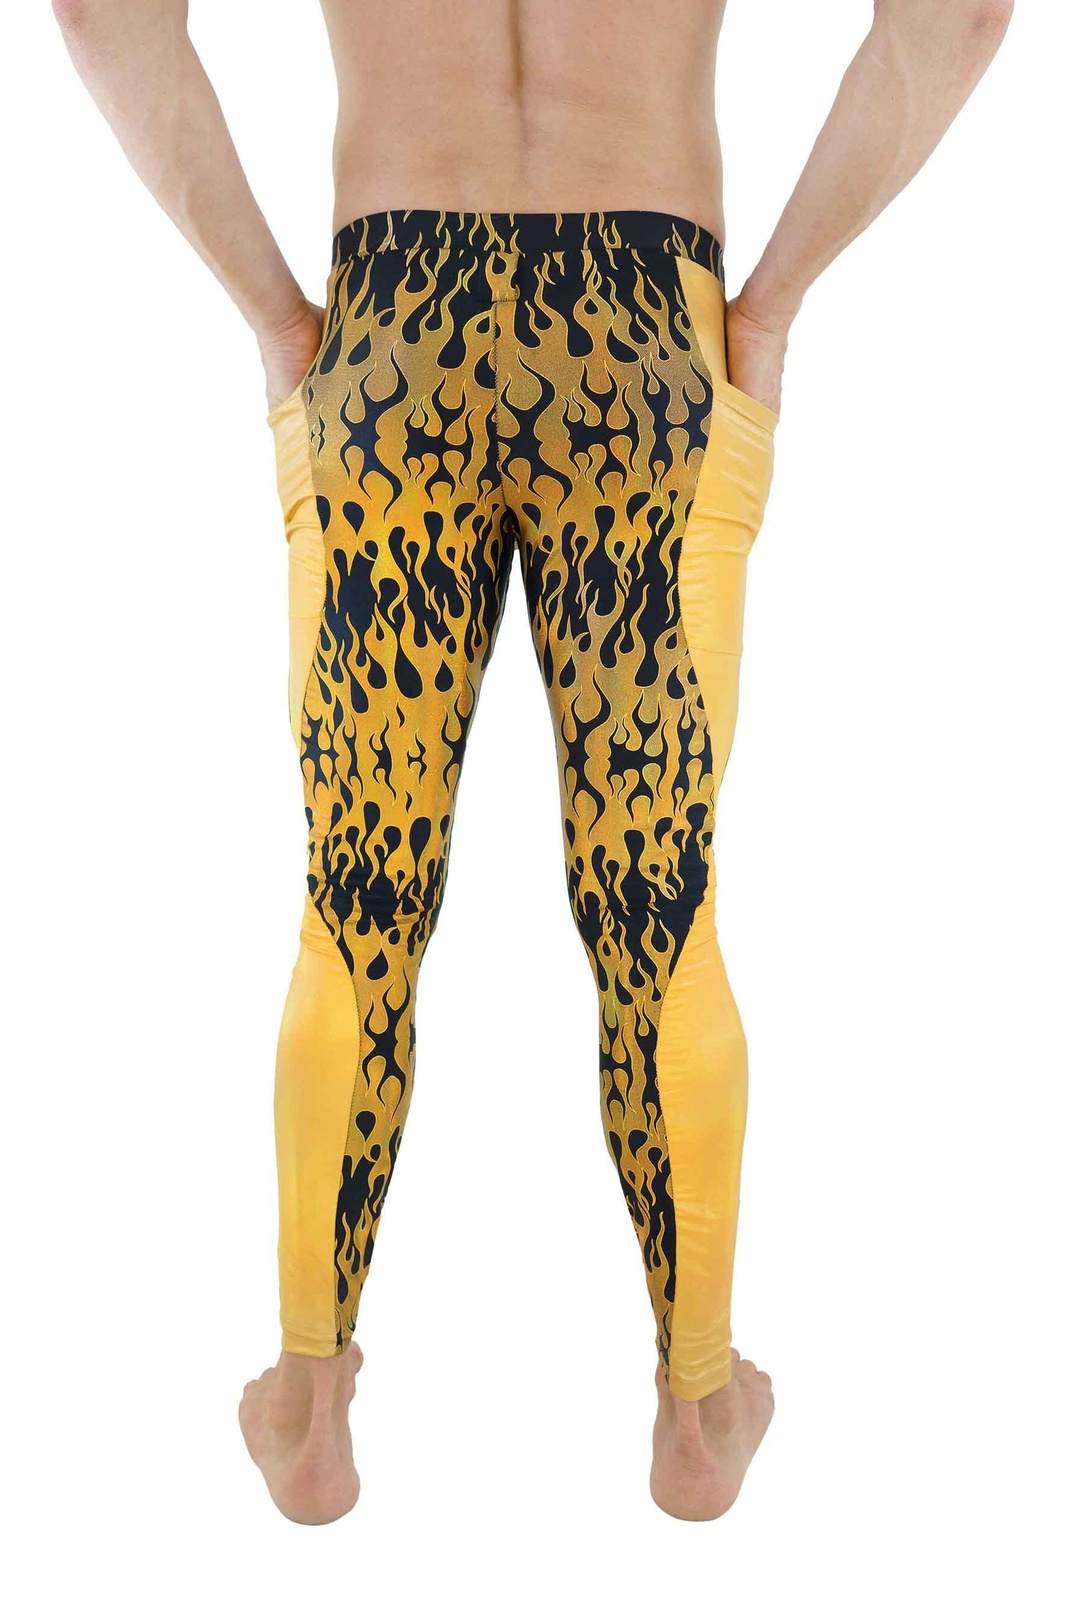 Flame Print Black & Gold Meggings with Pockets | Love Khaos